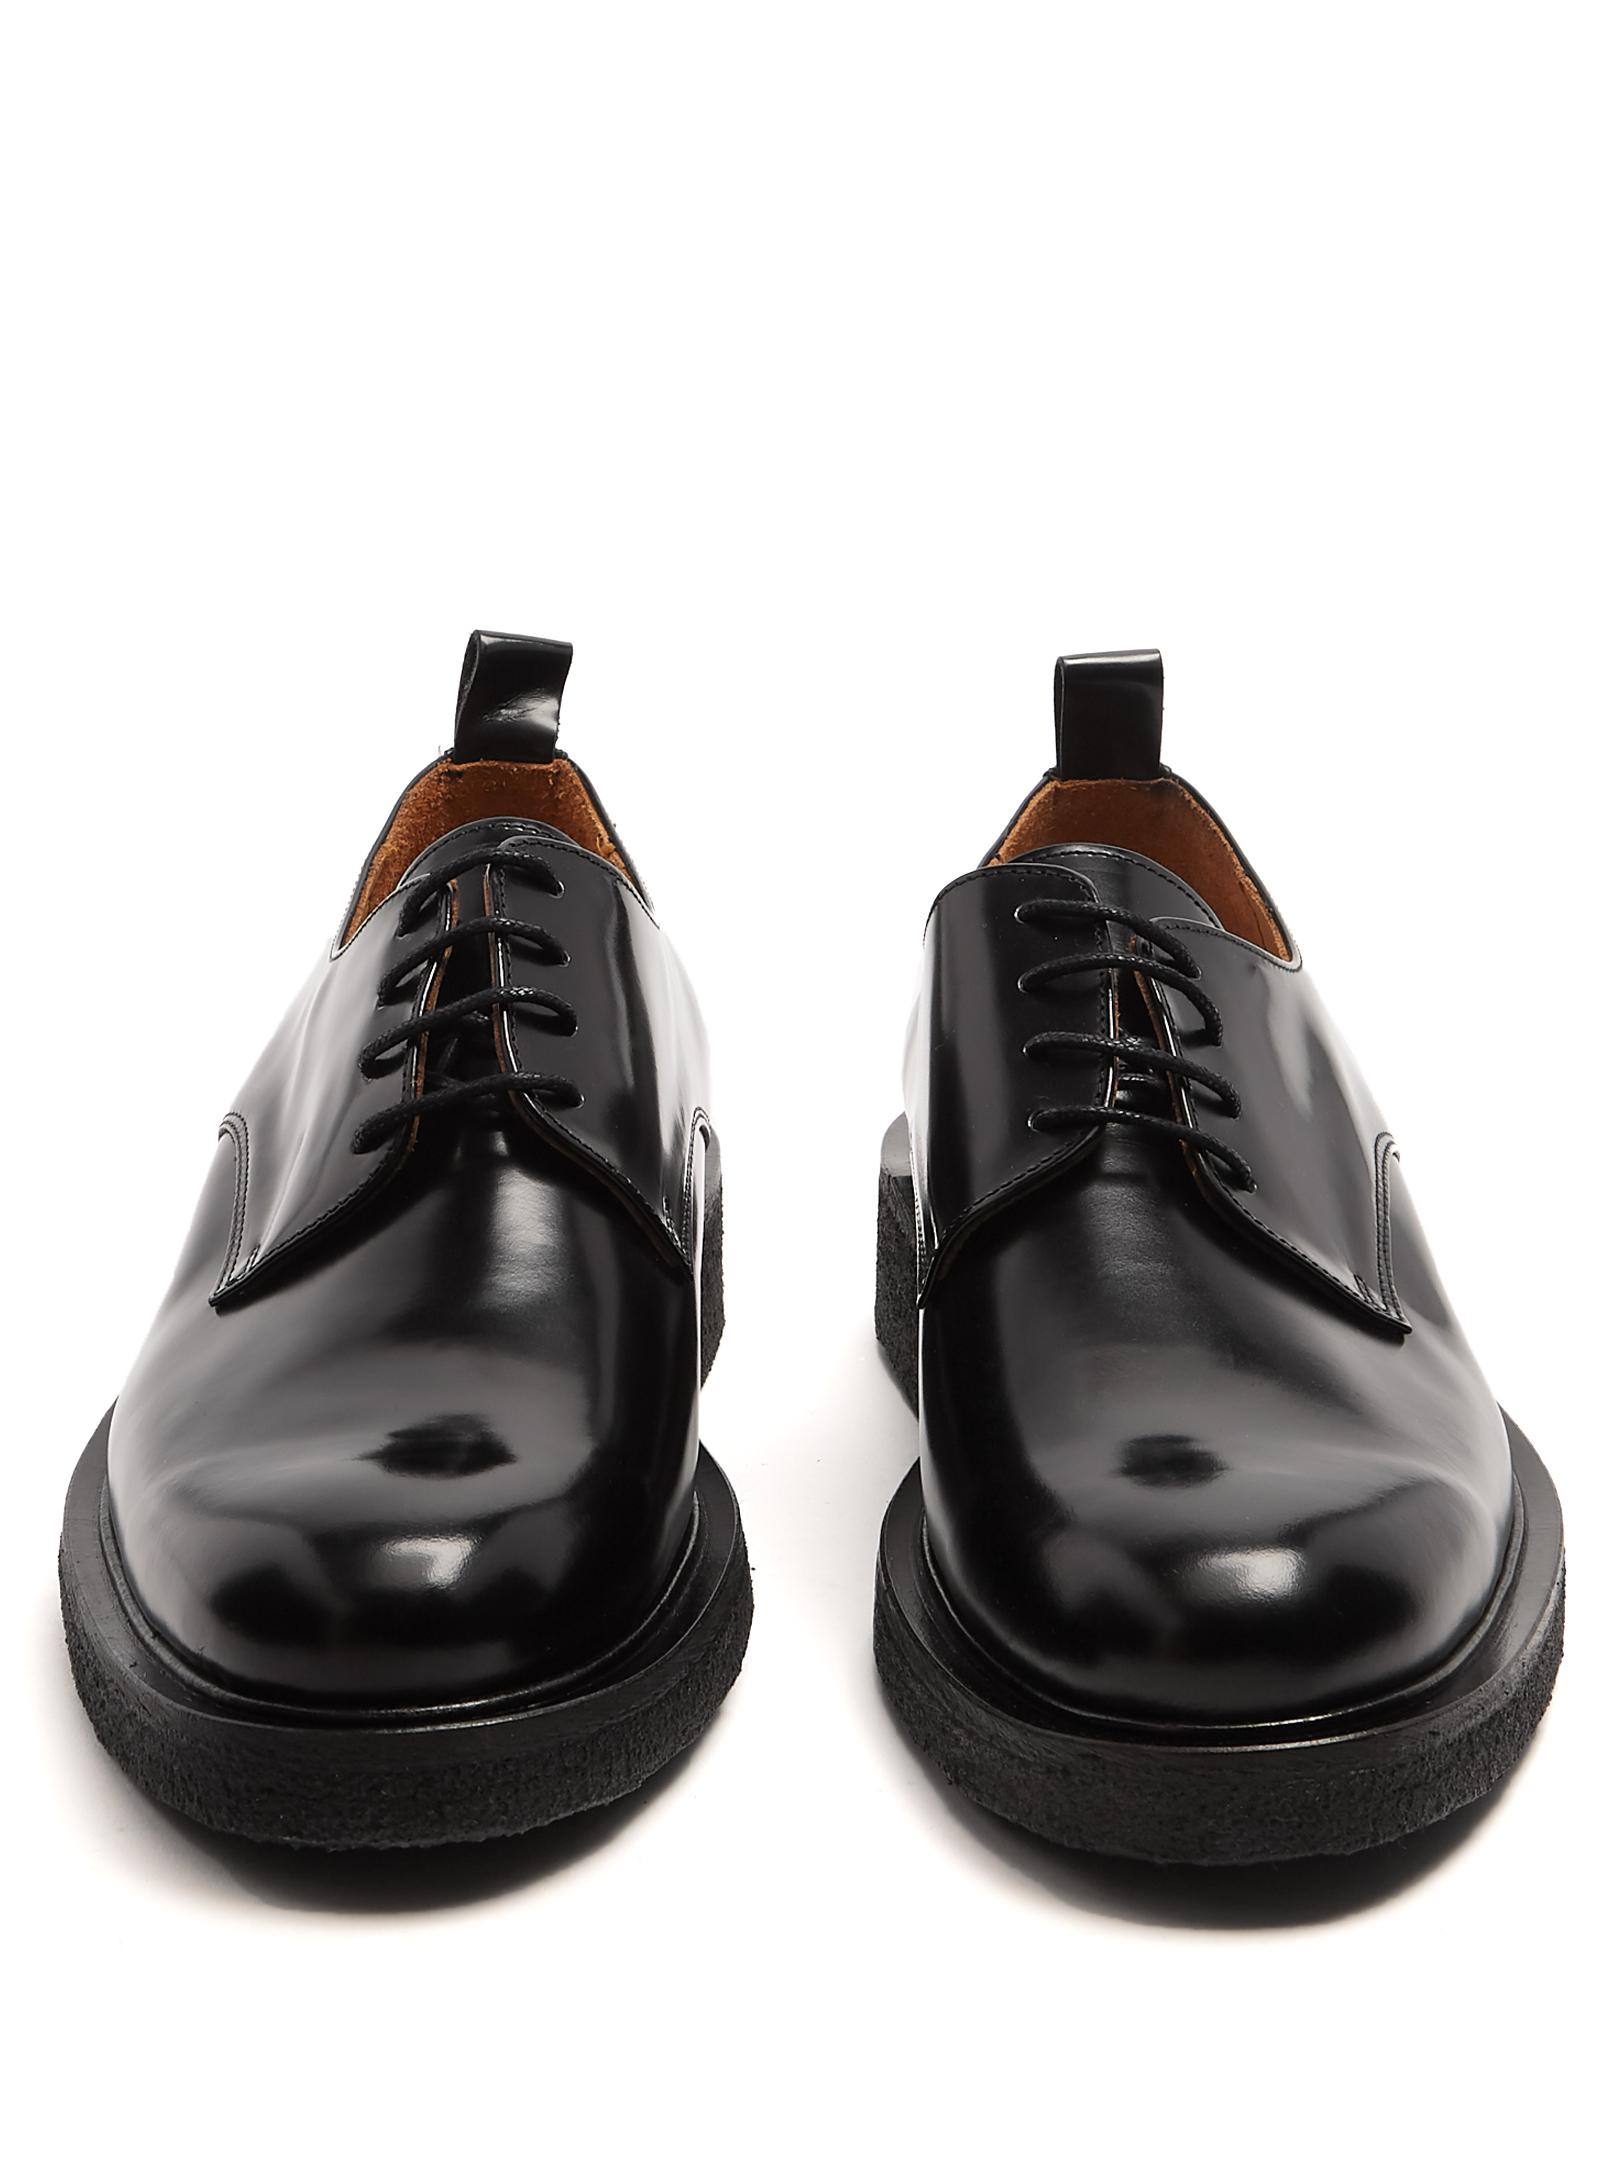 AMI Leather Derby Shoes in Black for Men - Lyst